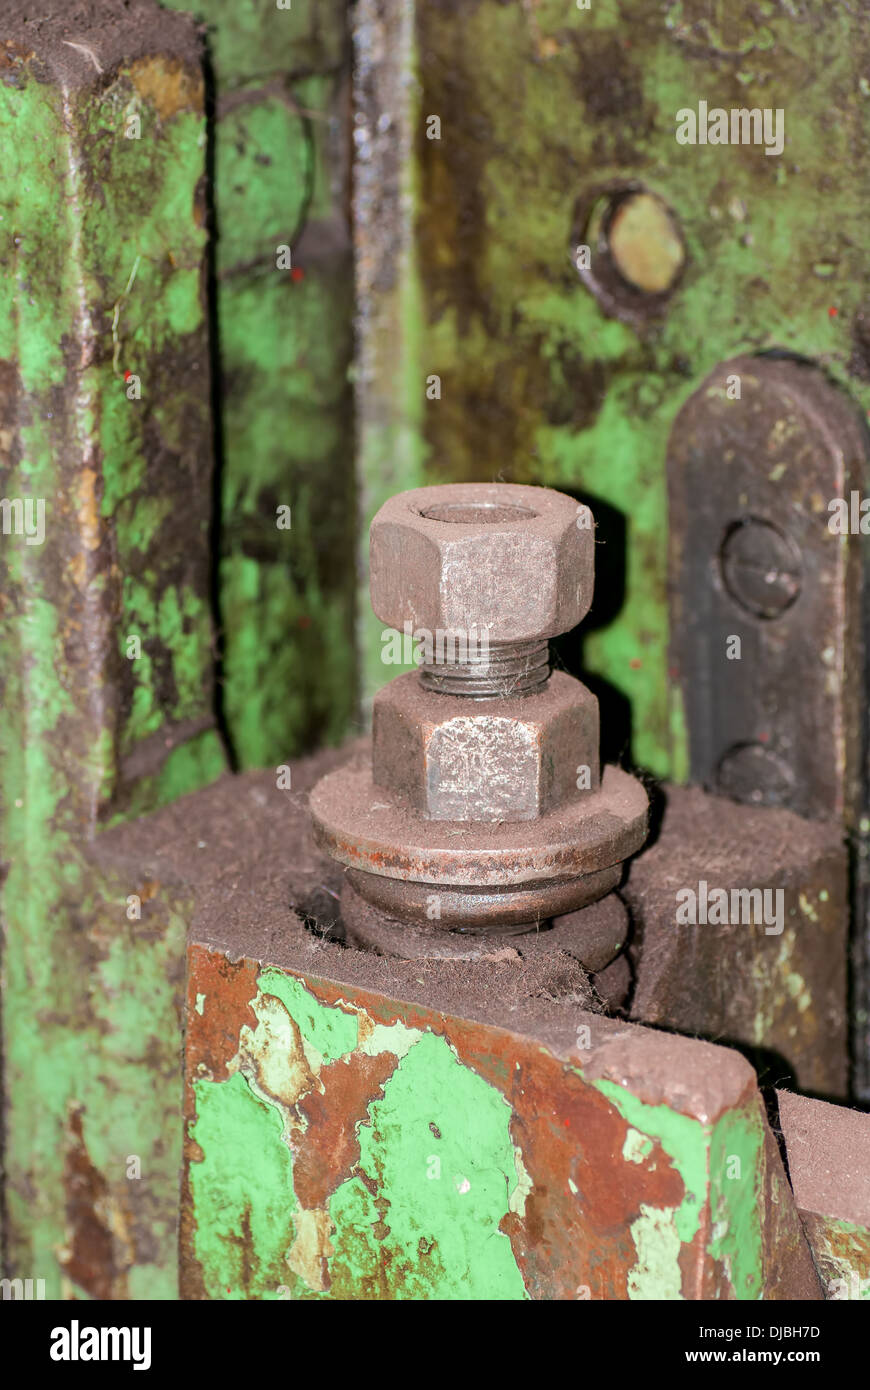 Old metal construction bonded bolts and nut Stock Photo